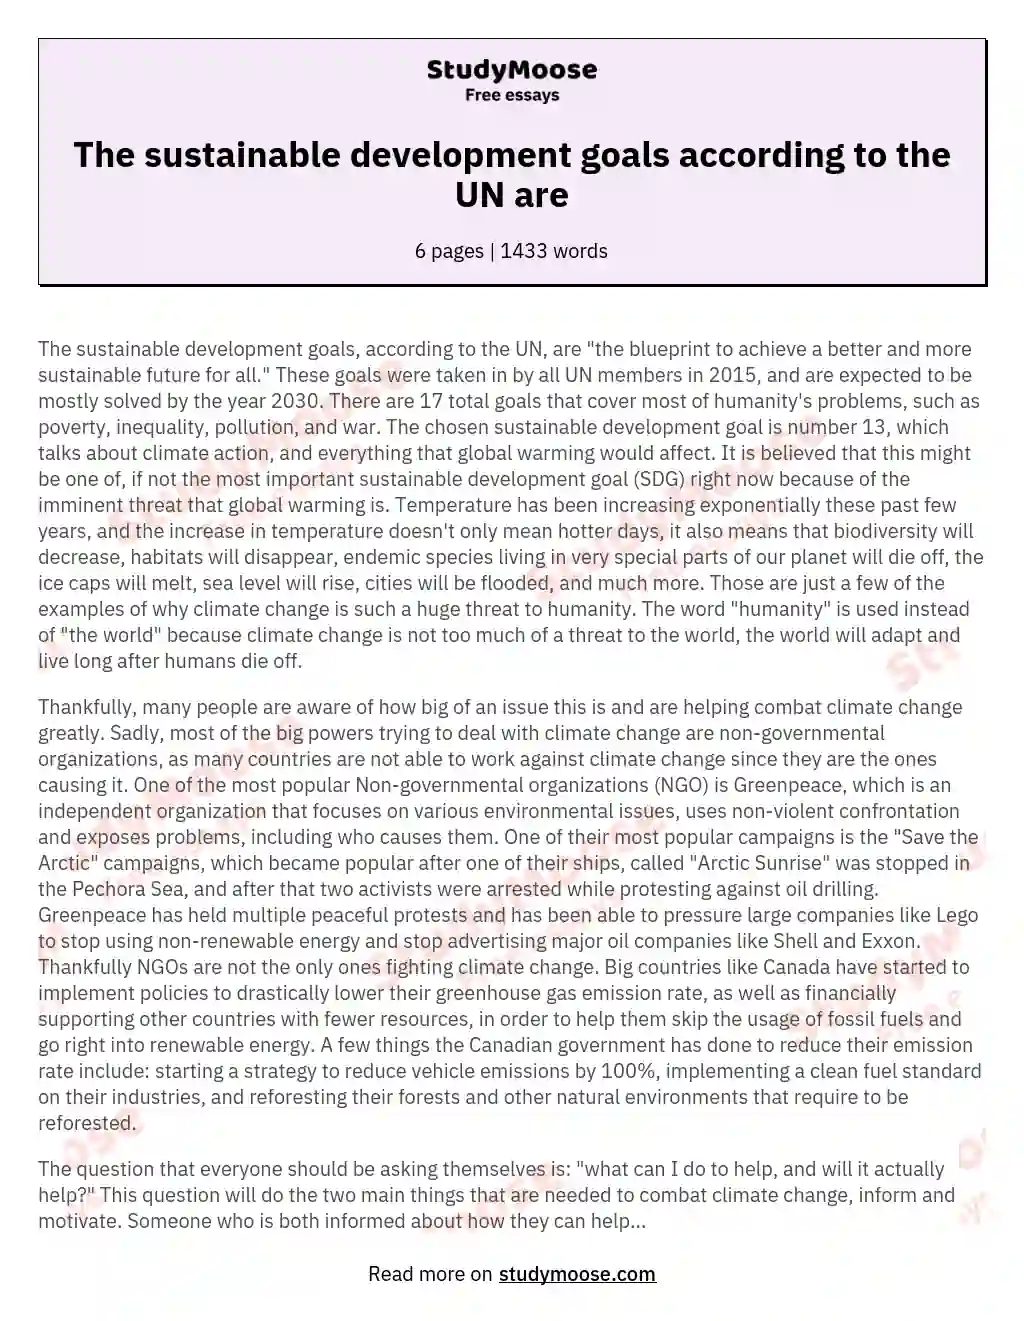 The sustainable development goals according to the UN are